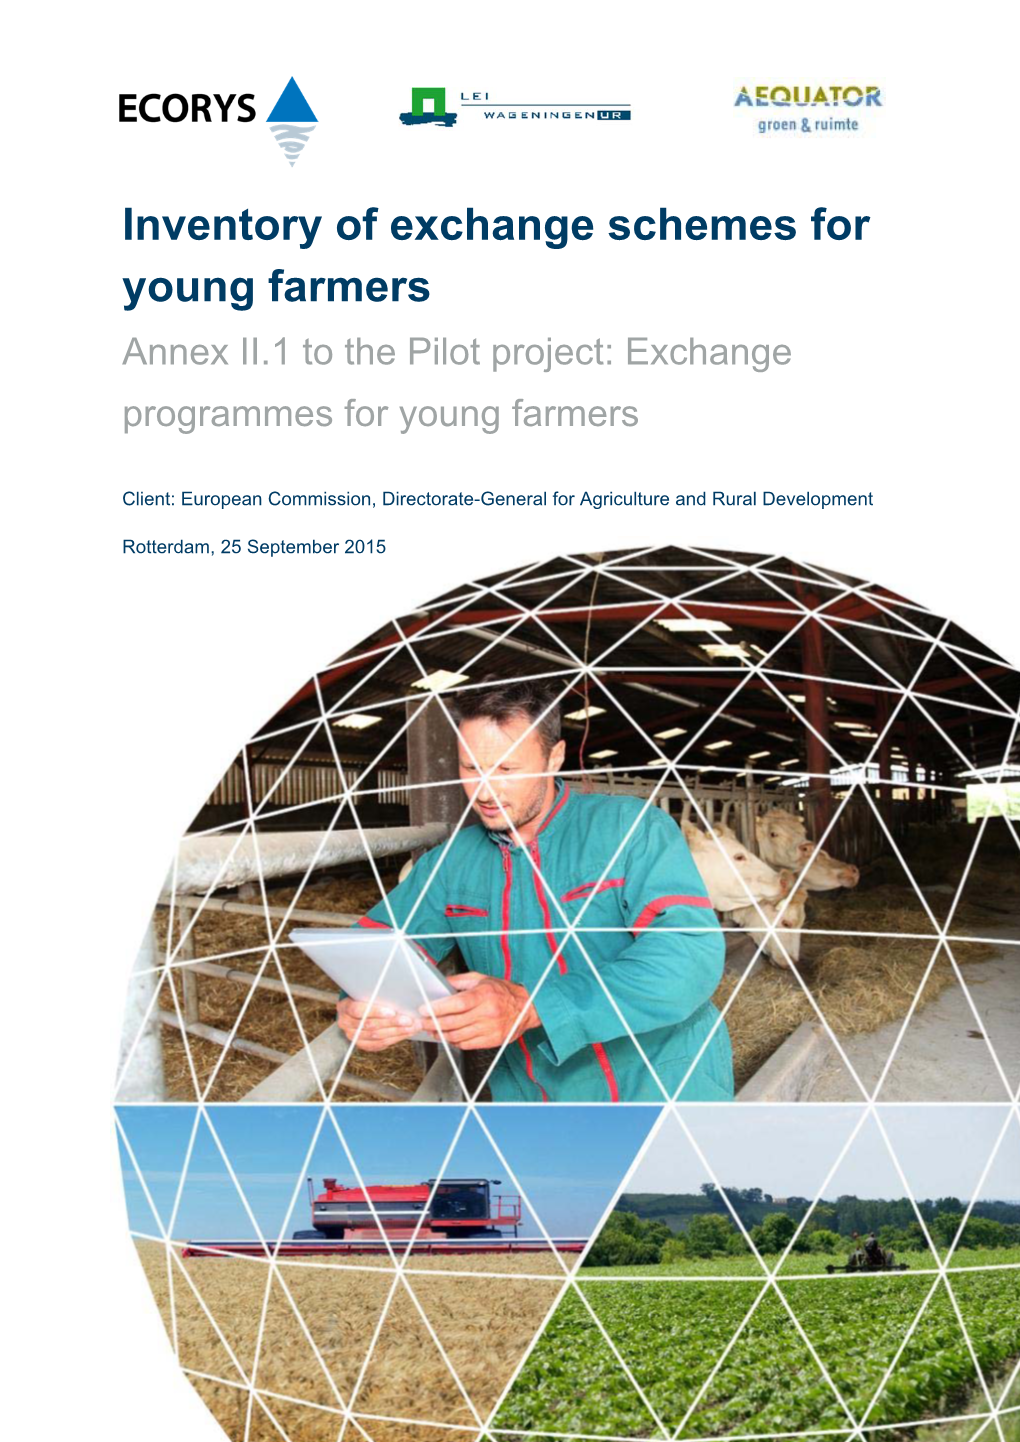 Inventory of Exchange Schemes for Young Farmers Annex II.1 to the Pilot Project: Exchange Programmes for Young Farmers